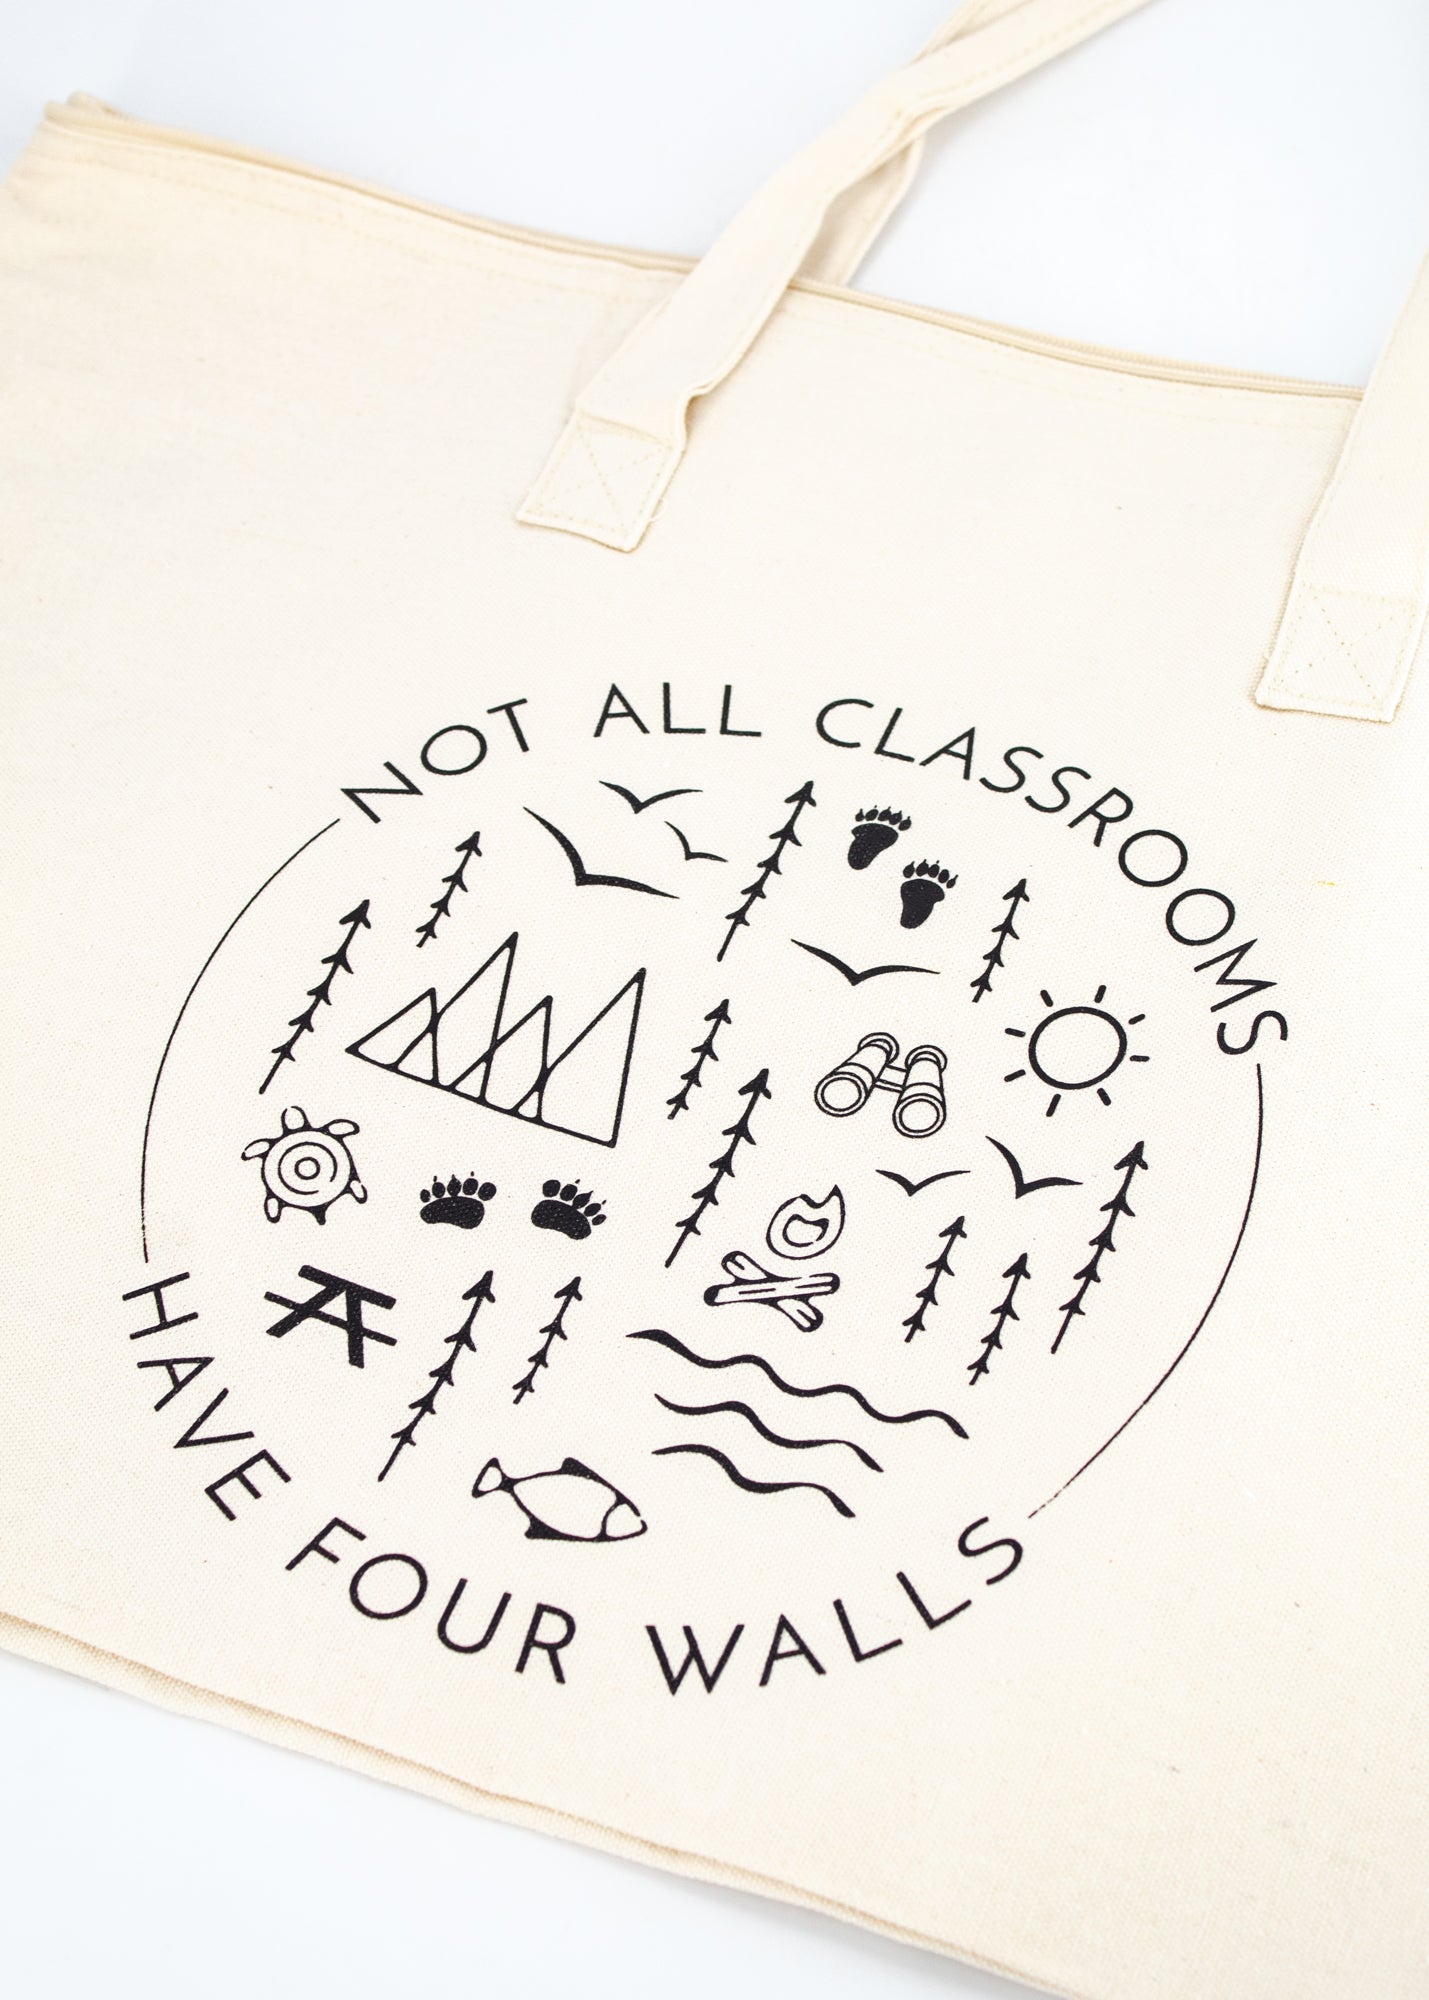 Large Cream Tote Bag - "Not All Classrooms Have Four Walls" -  - Nature Supply Co. - Wild Lark